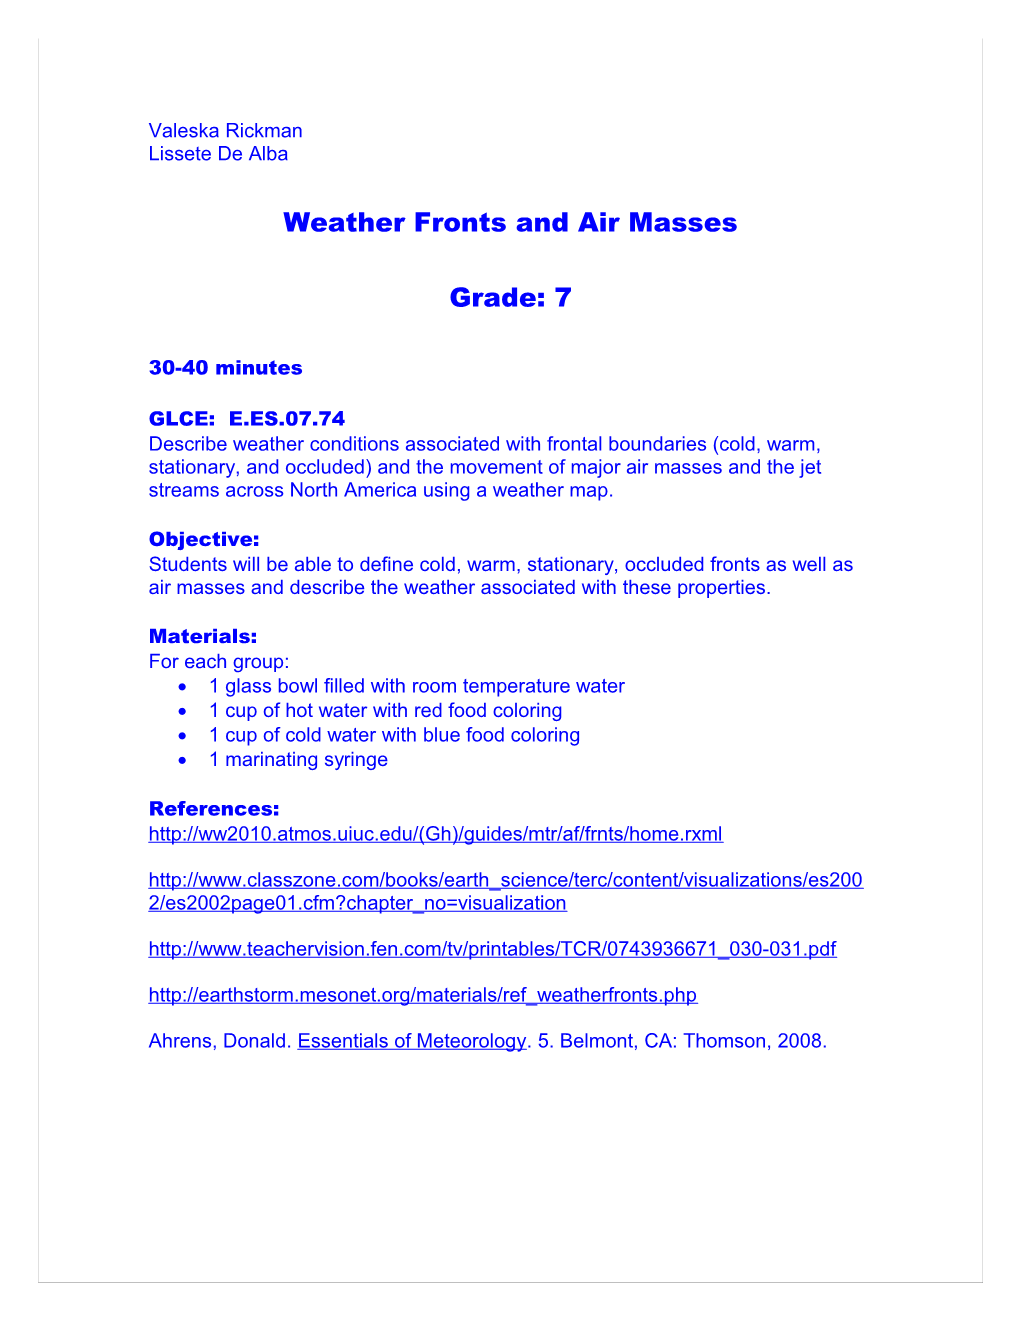 Weather Fronts and Air Masses